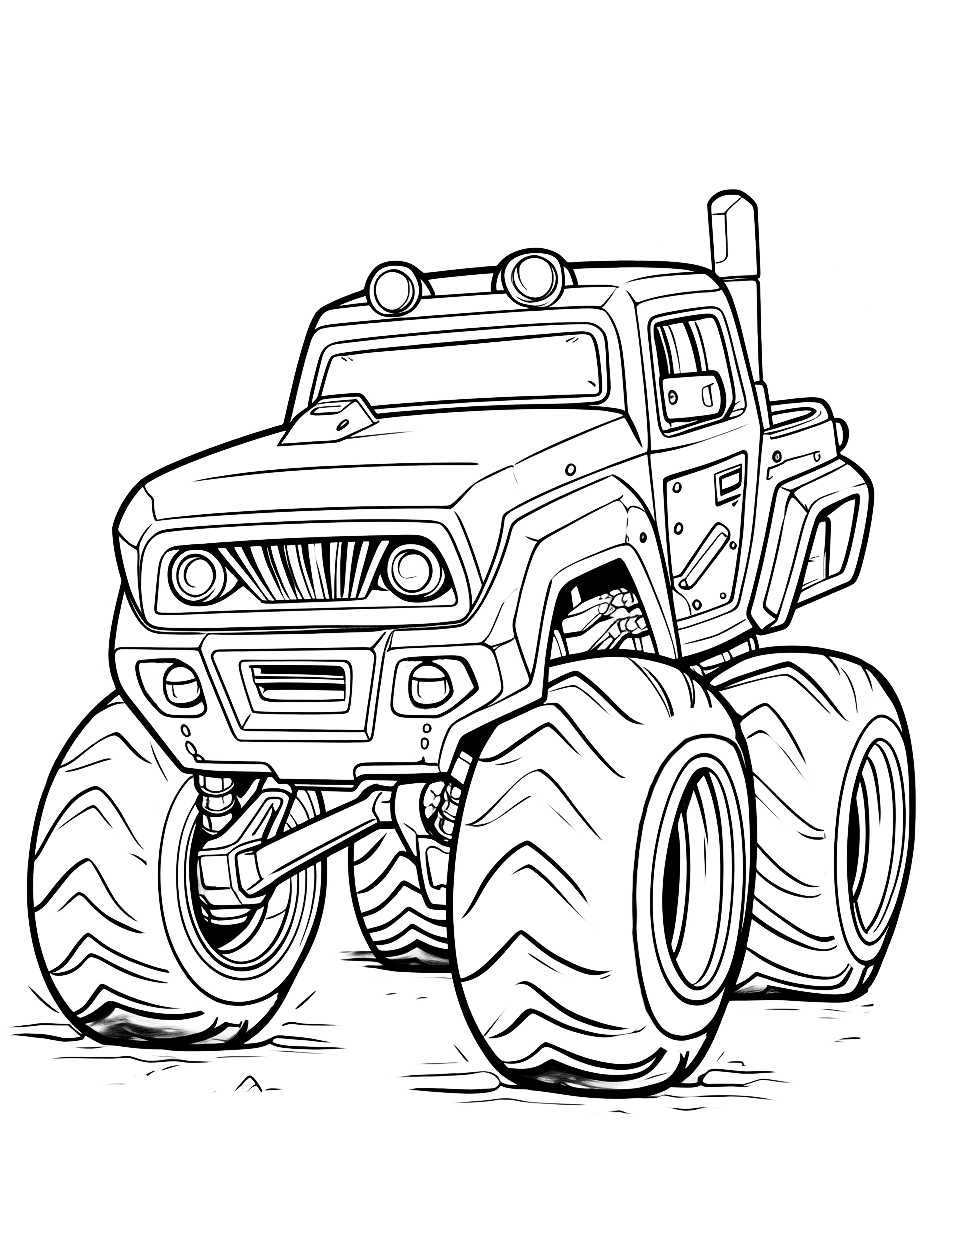 Robot Rampage Monster Truck Coloring Page - A robot-themed monster truck with metallic designs.